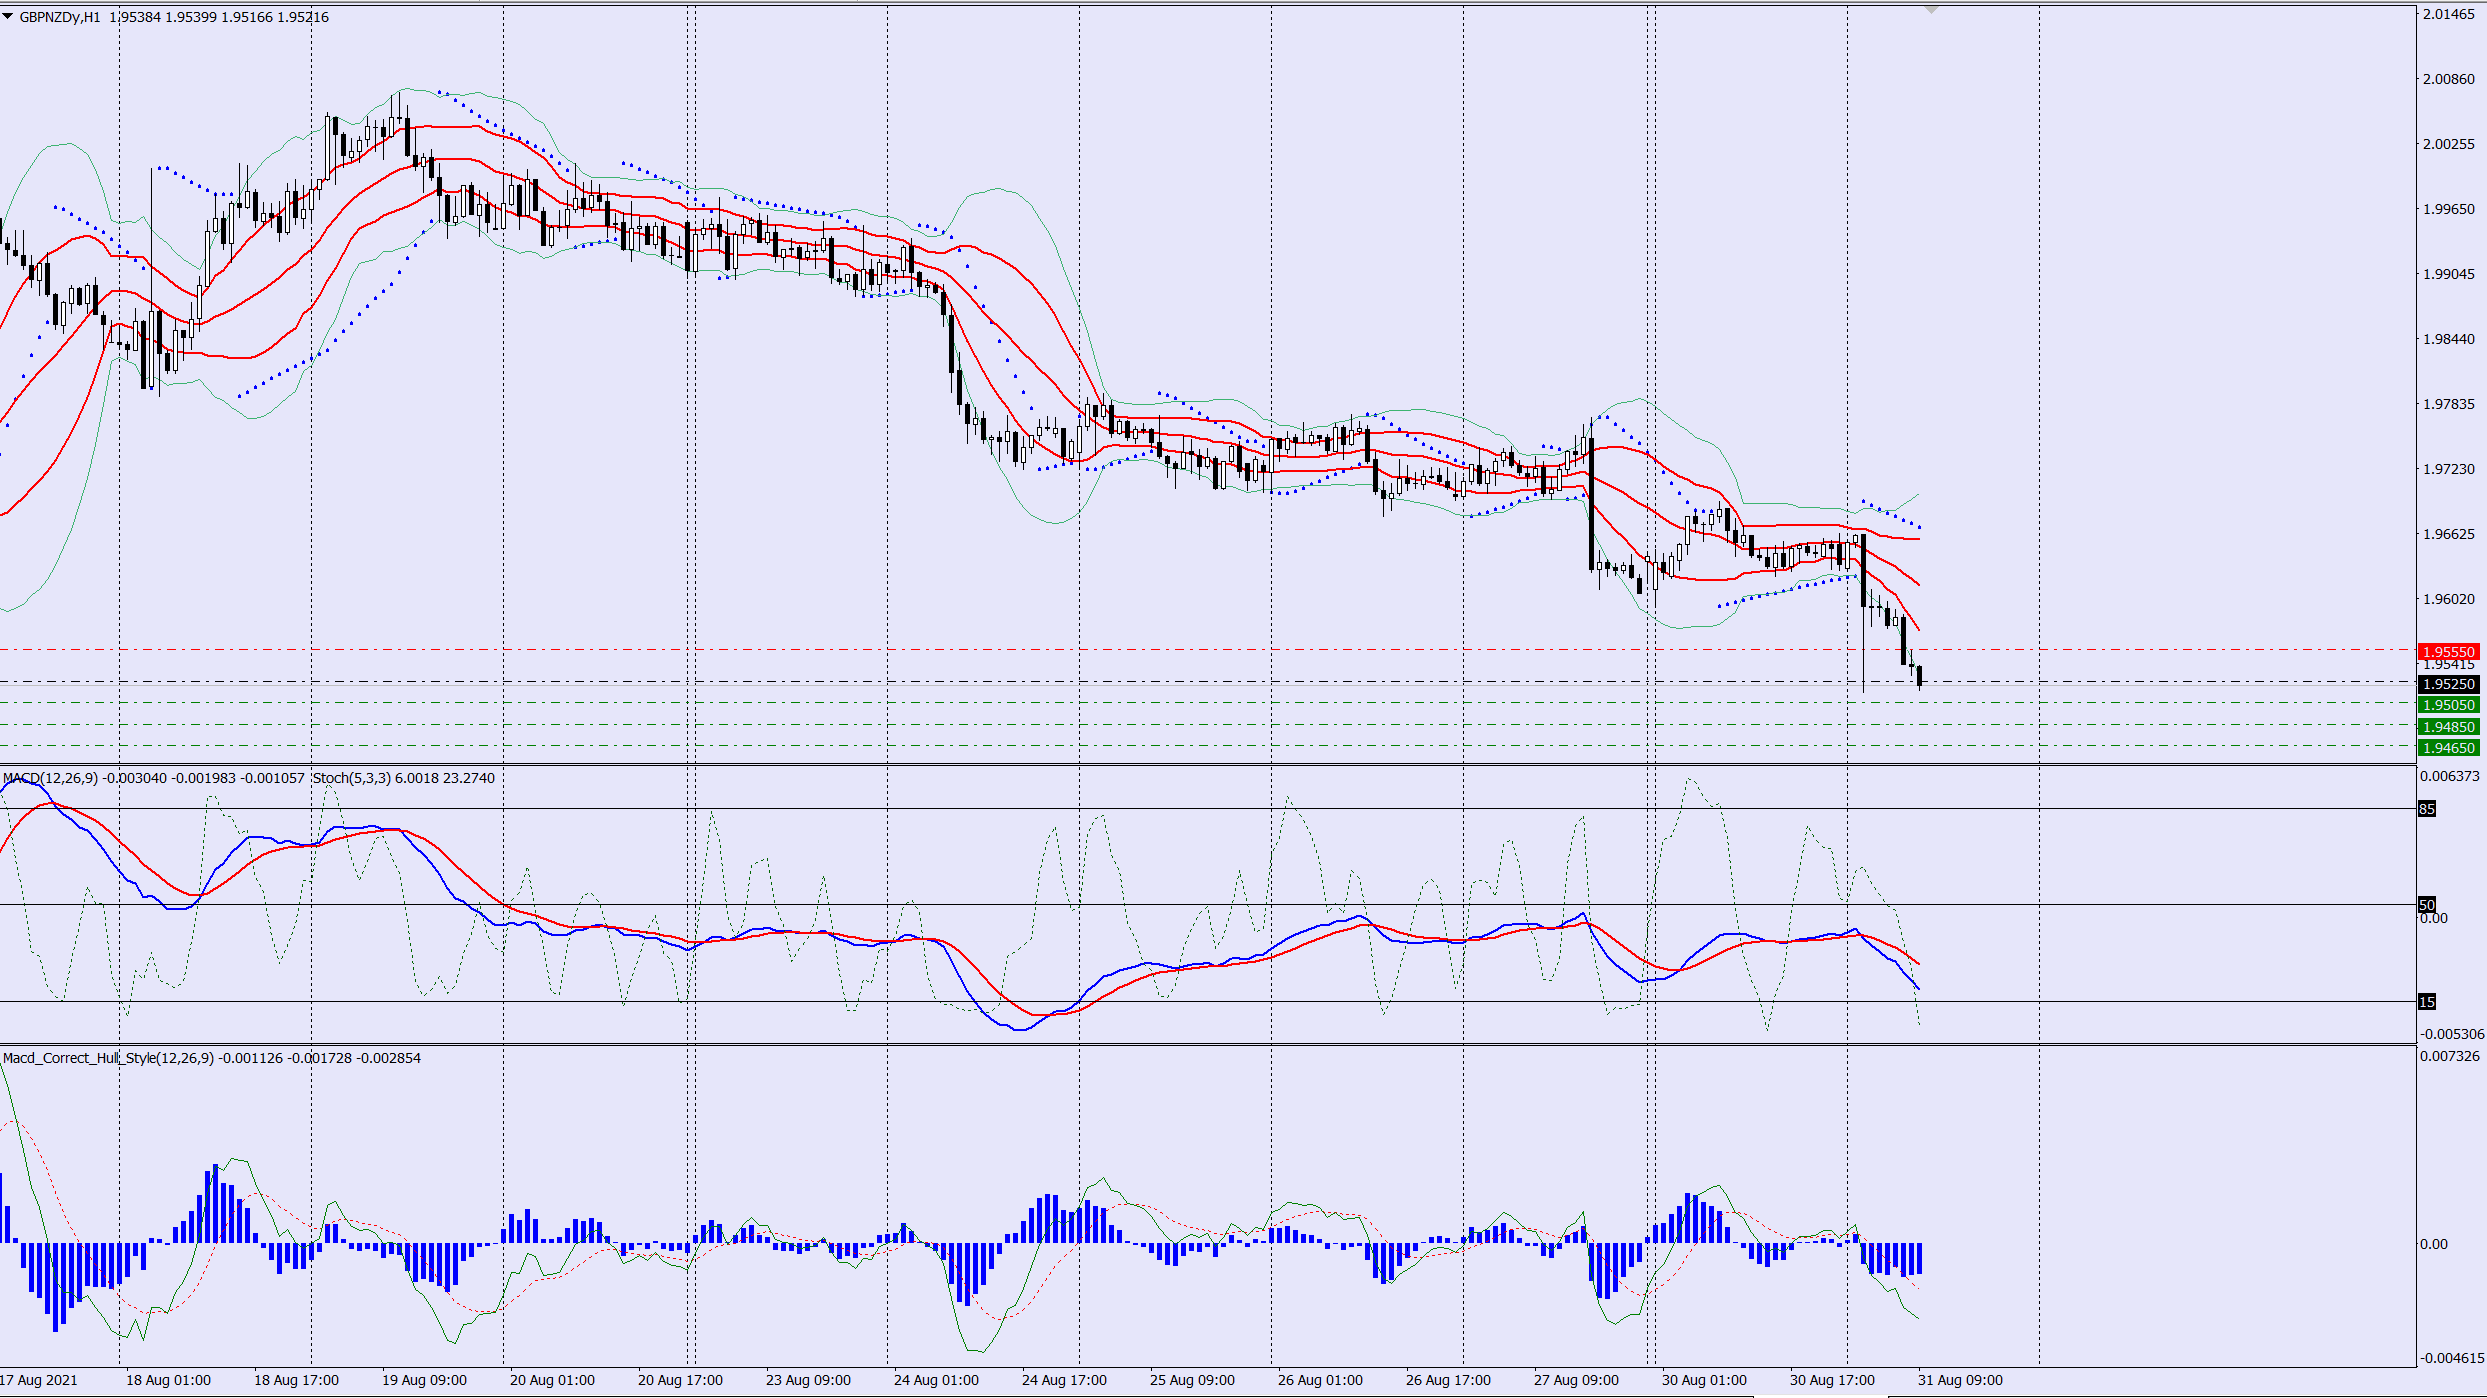 GBPNZD sell trade idea 31 08 2021